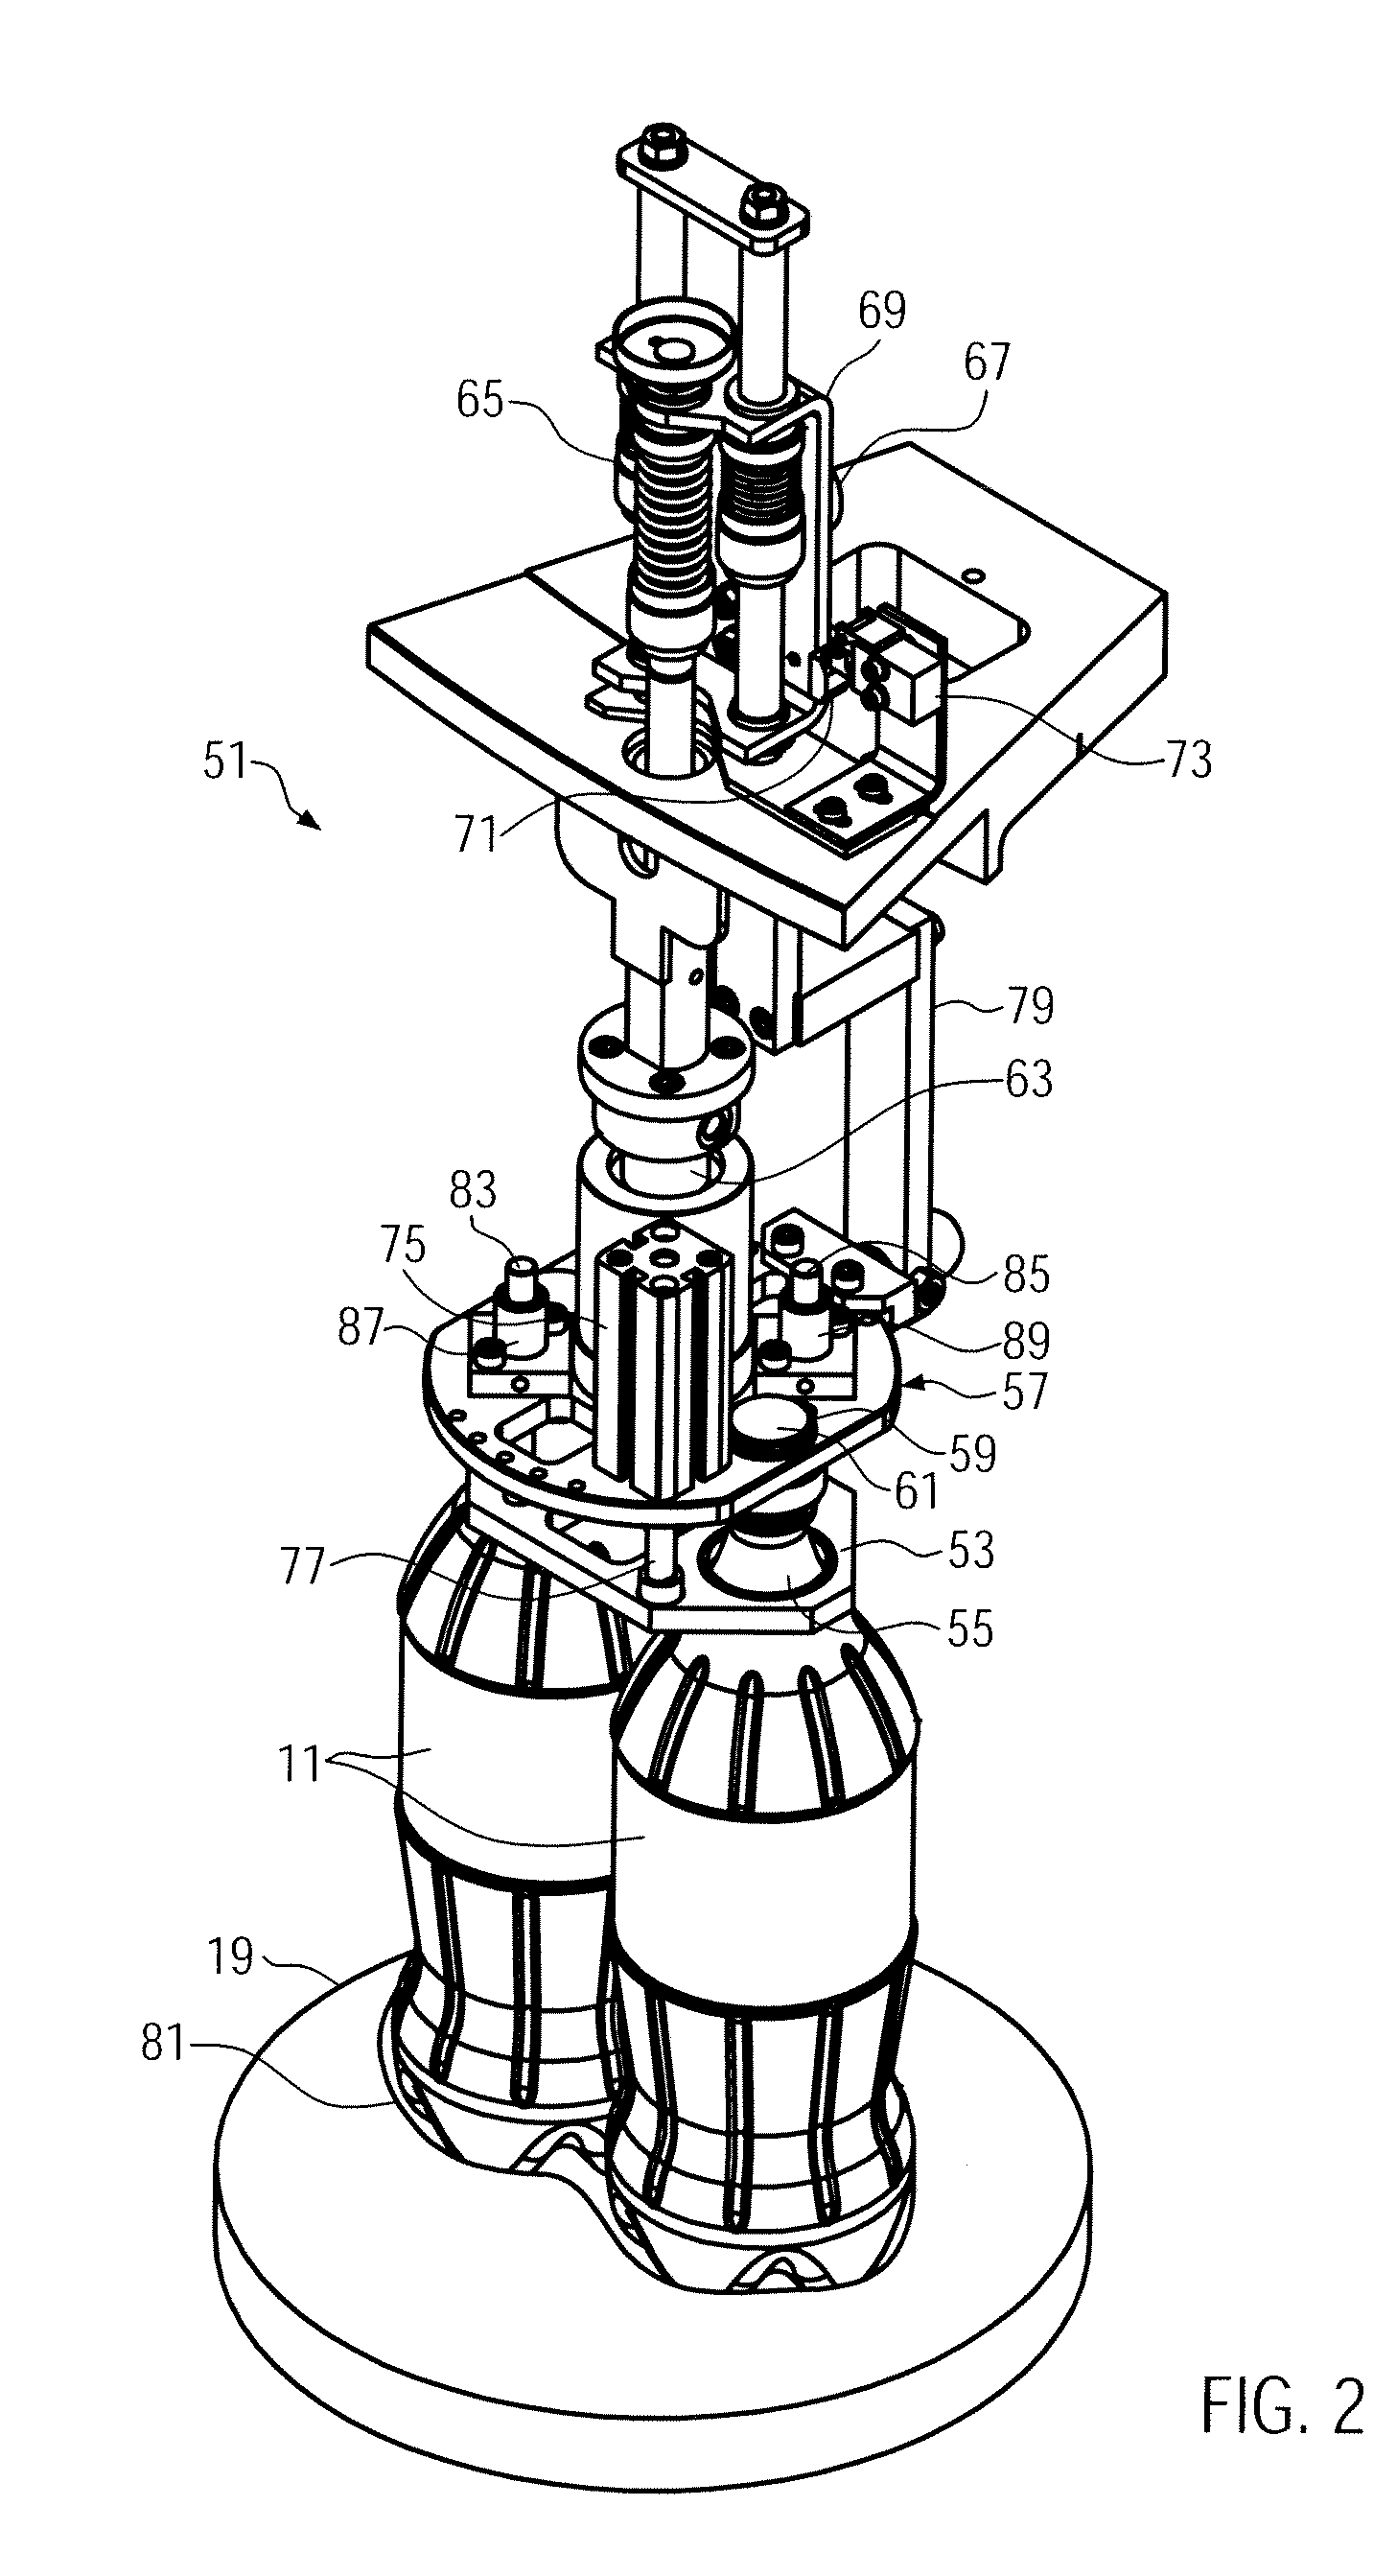 Centering unit for aligning at least two grouped vessels and method for aligning two grouped vessels